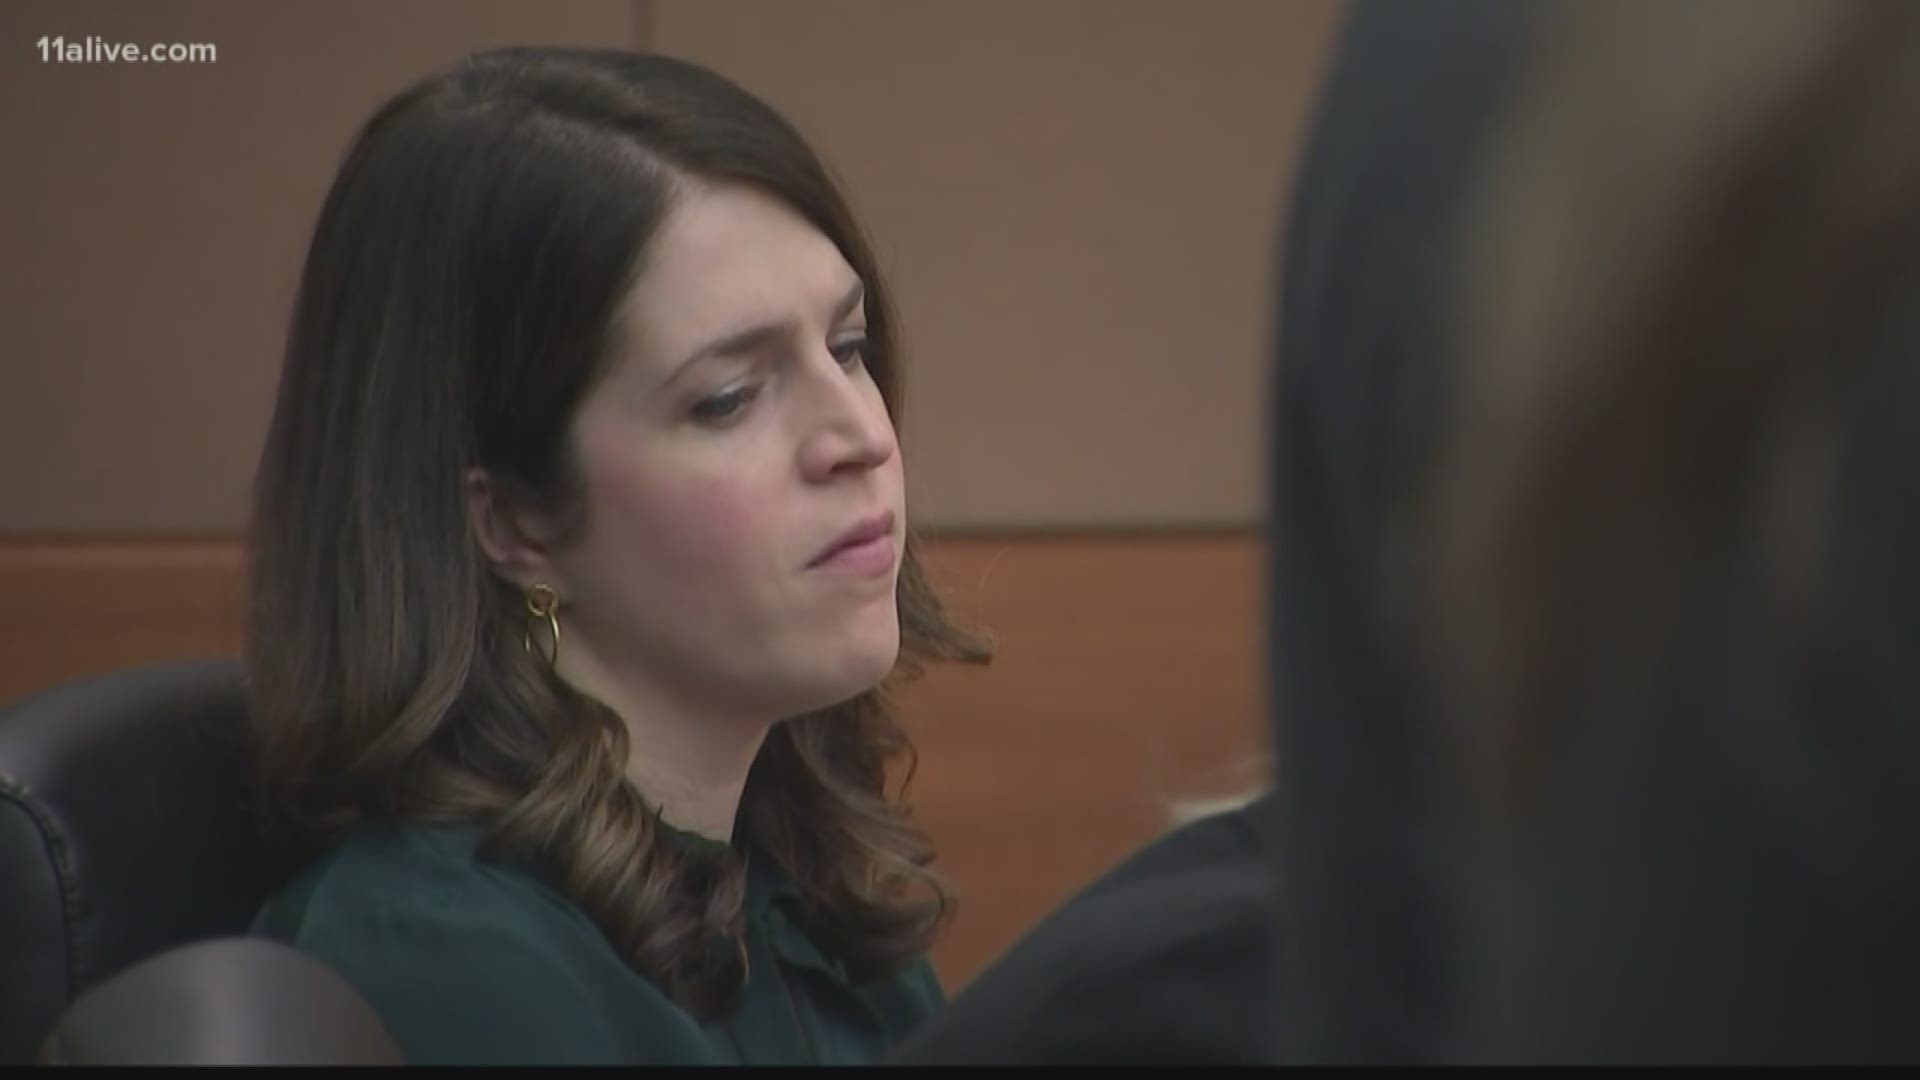 Jenna Garland was found guilty of obstruction for allegedly telling city workers to delay communications and purposely release confusing information.